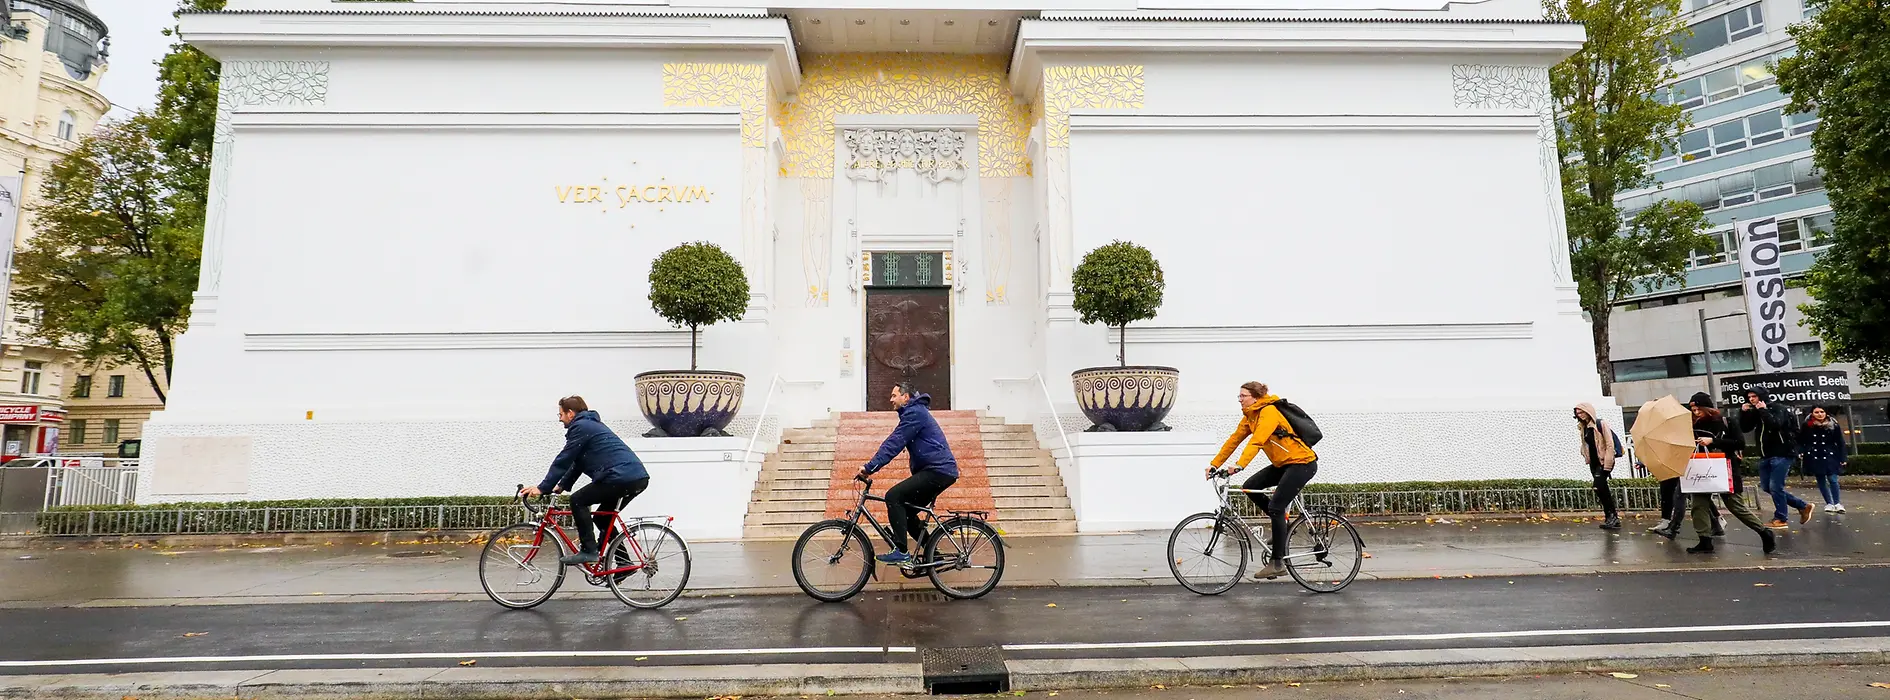 Cyclists in front of the Secession